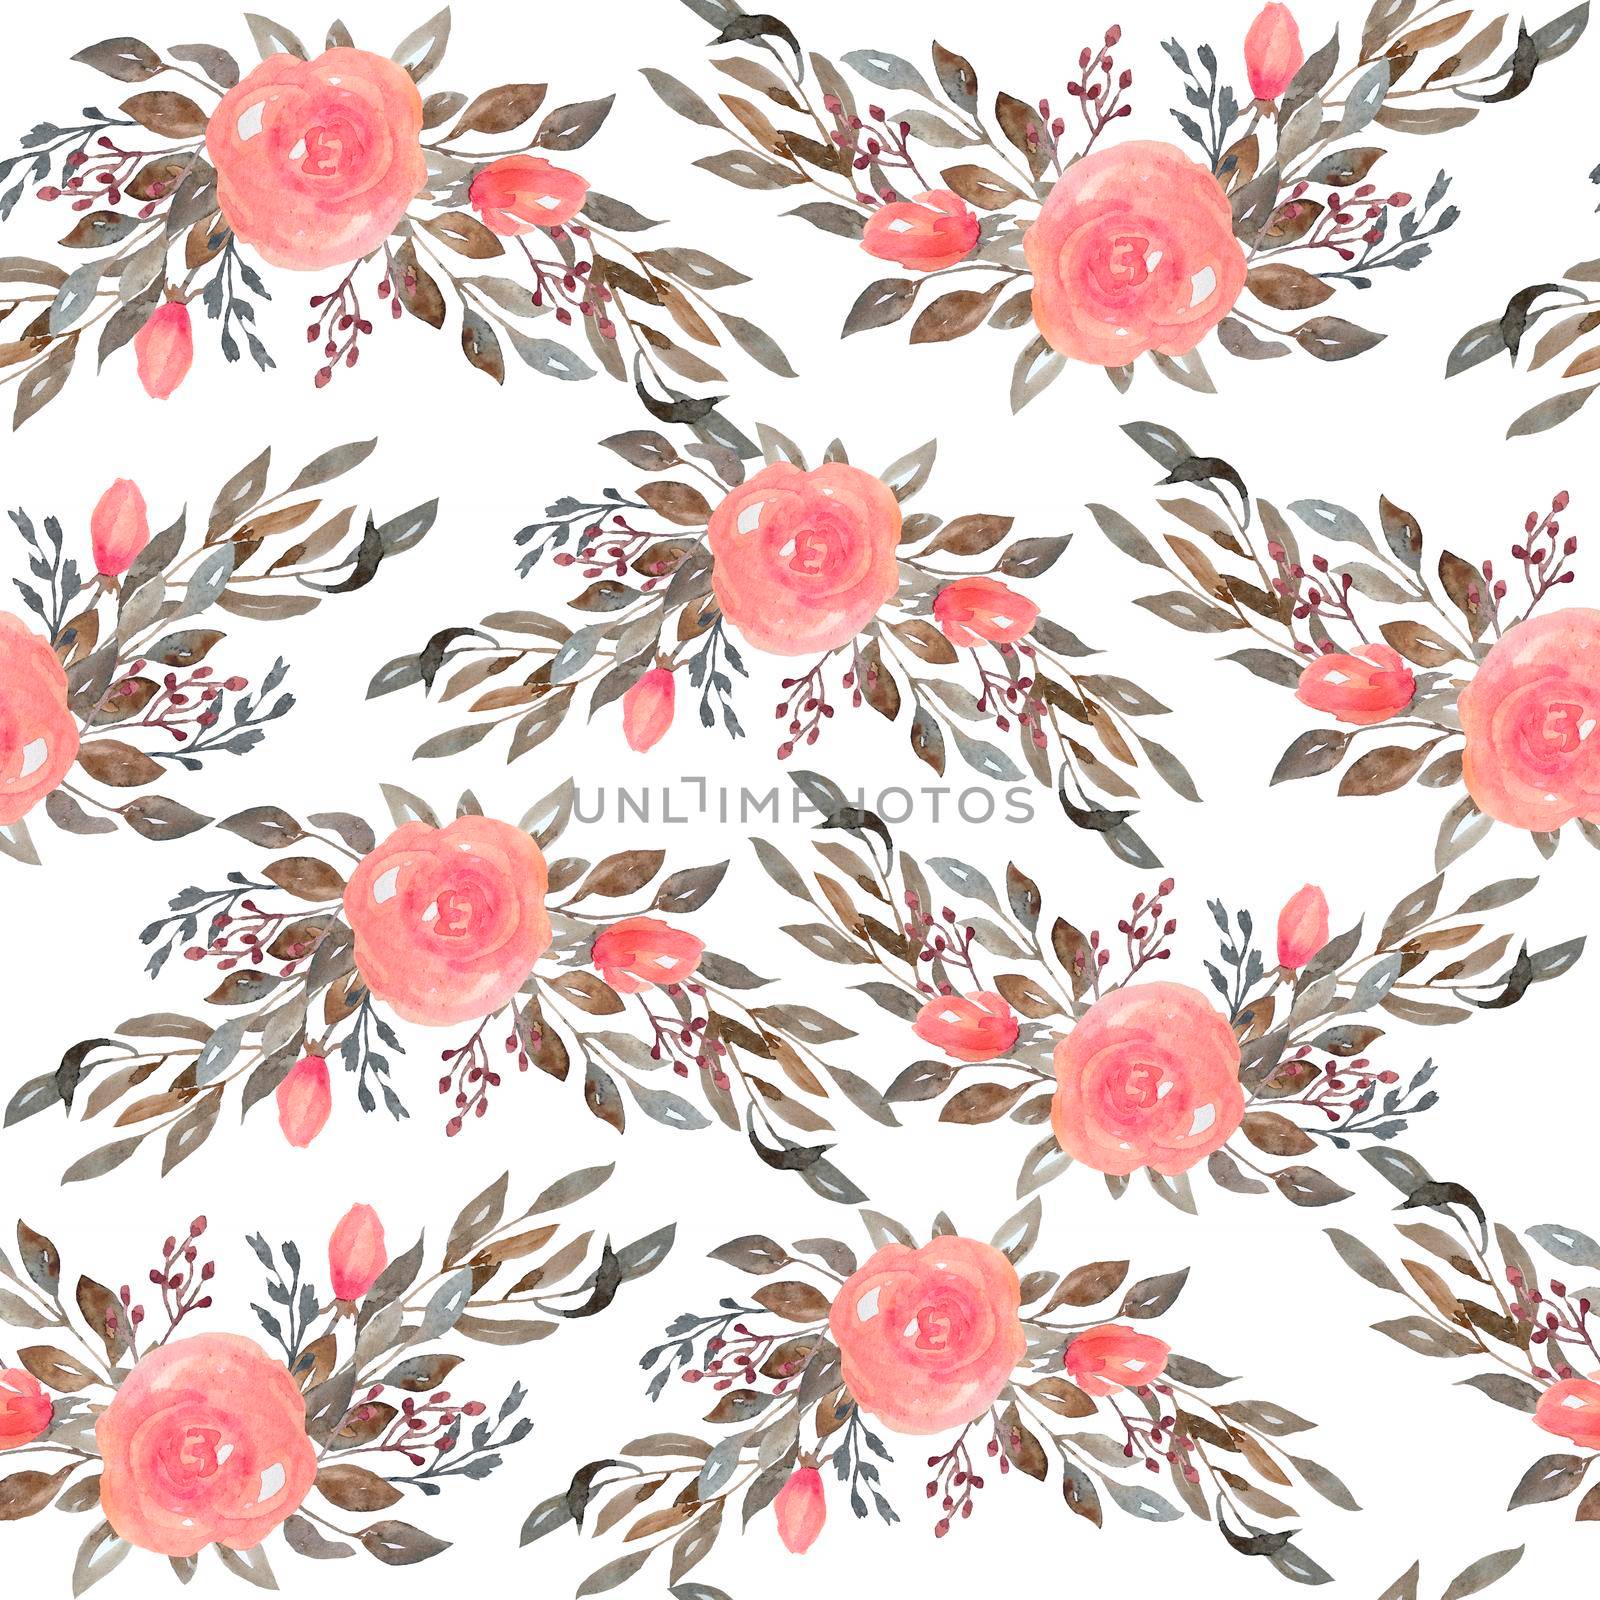 Watercolor seamless pattern of pink blush roses flowers and grey brown neutral faded leaves. Bouquets, petals blossom. Elegant garden blooms for textile wedding invitation cards wallpaper.. by Lagmar